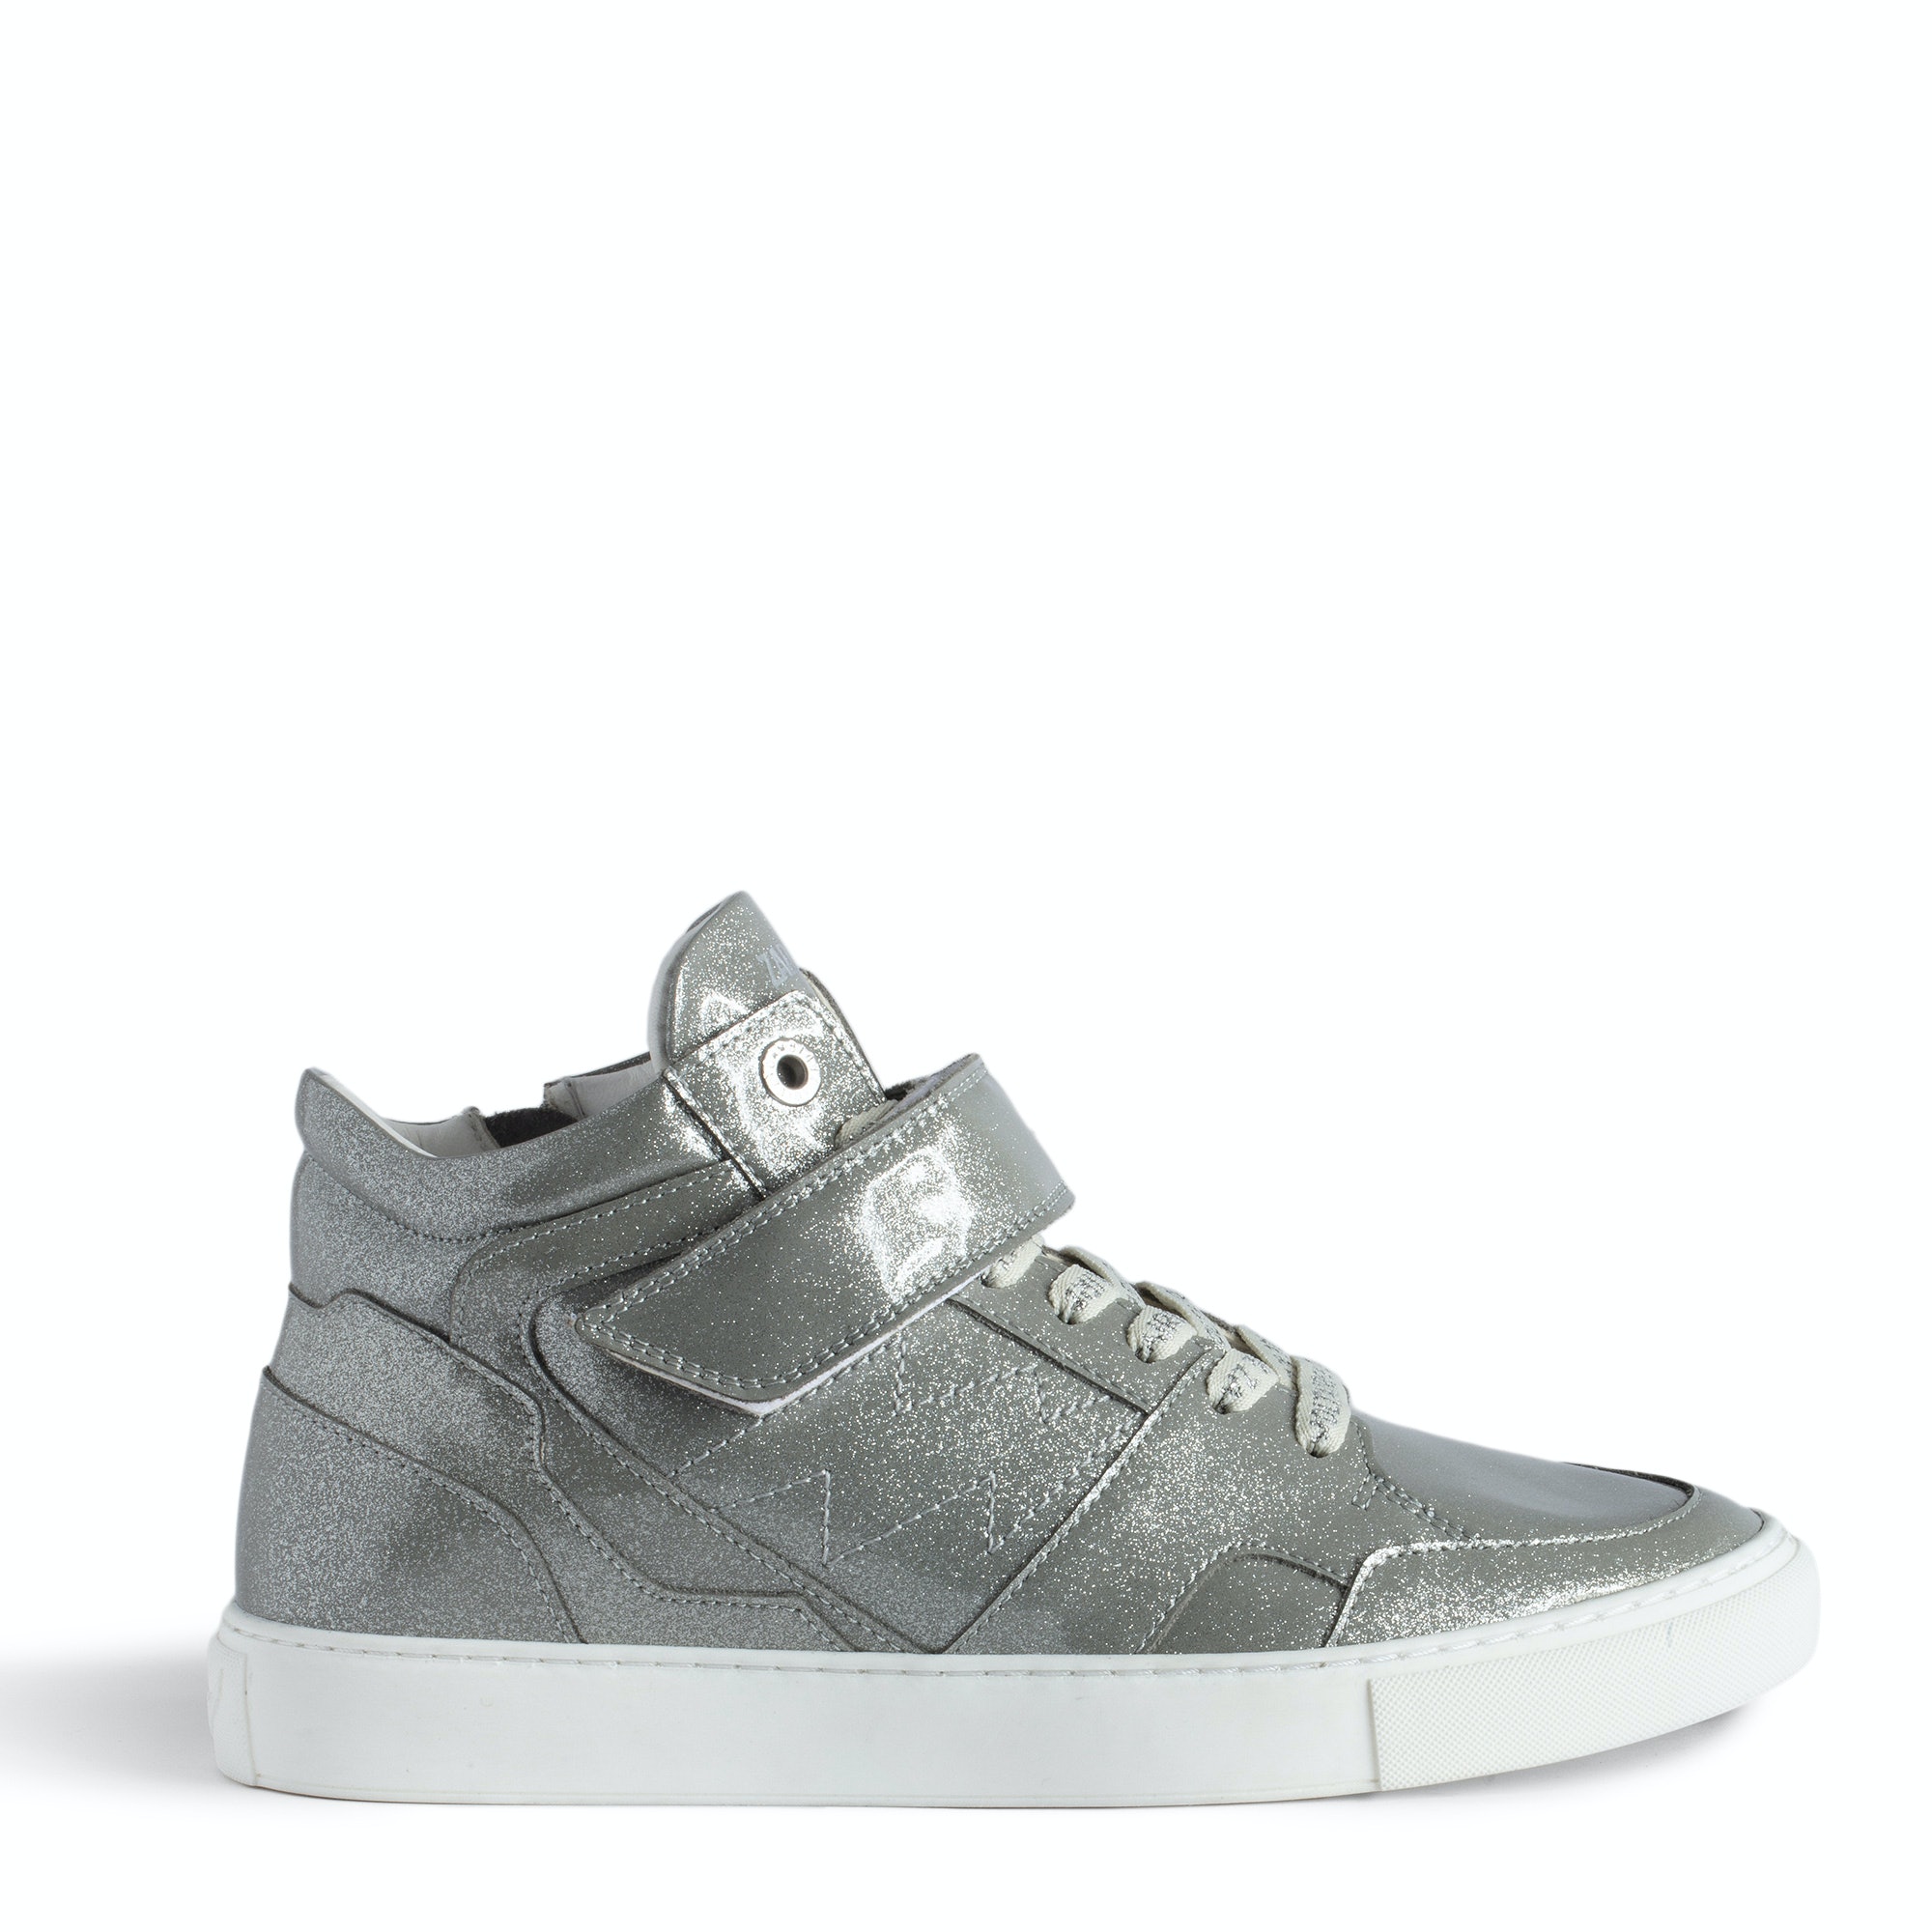 Sneakers Zv1747 Mid Flash Infinity Patent Silver - Taille 39 - Femme